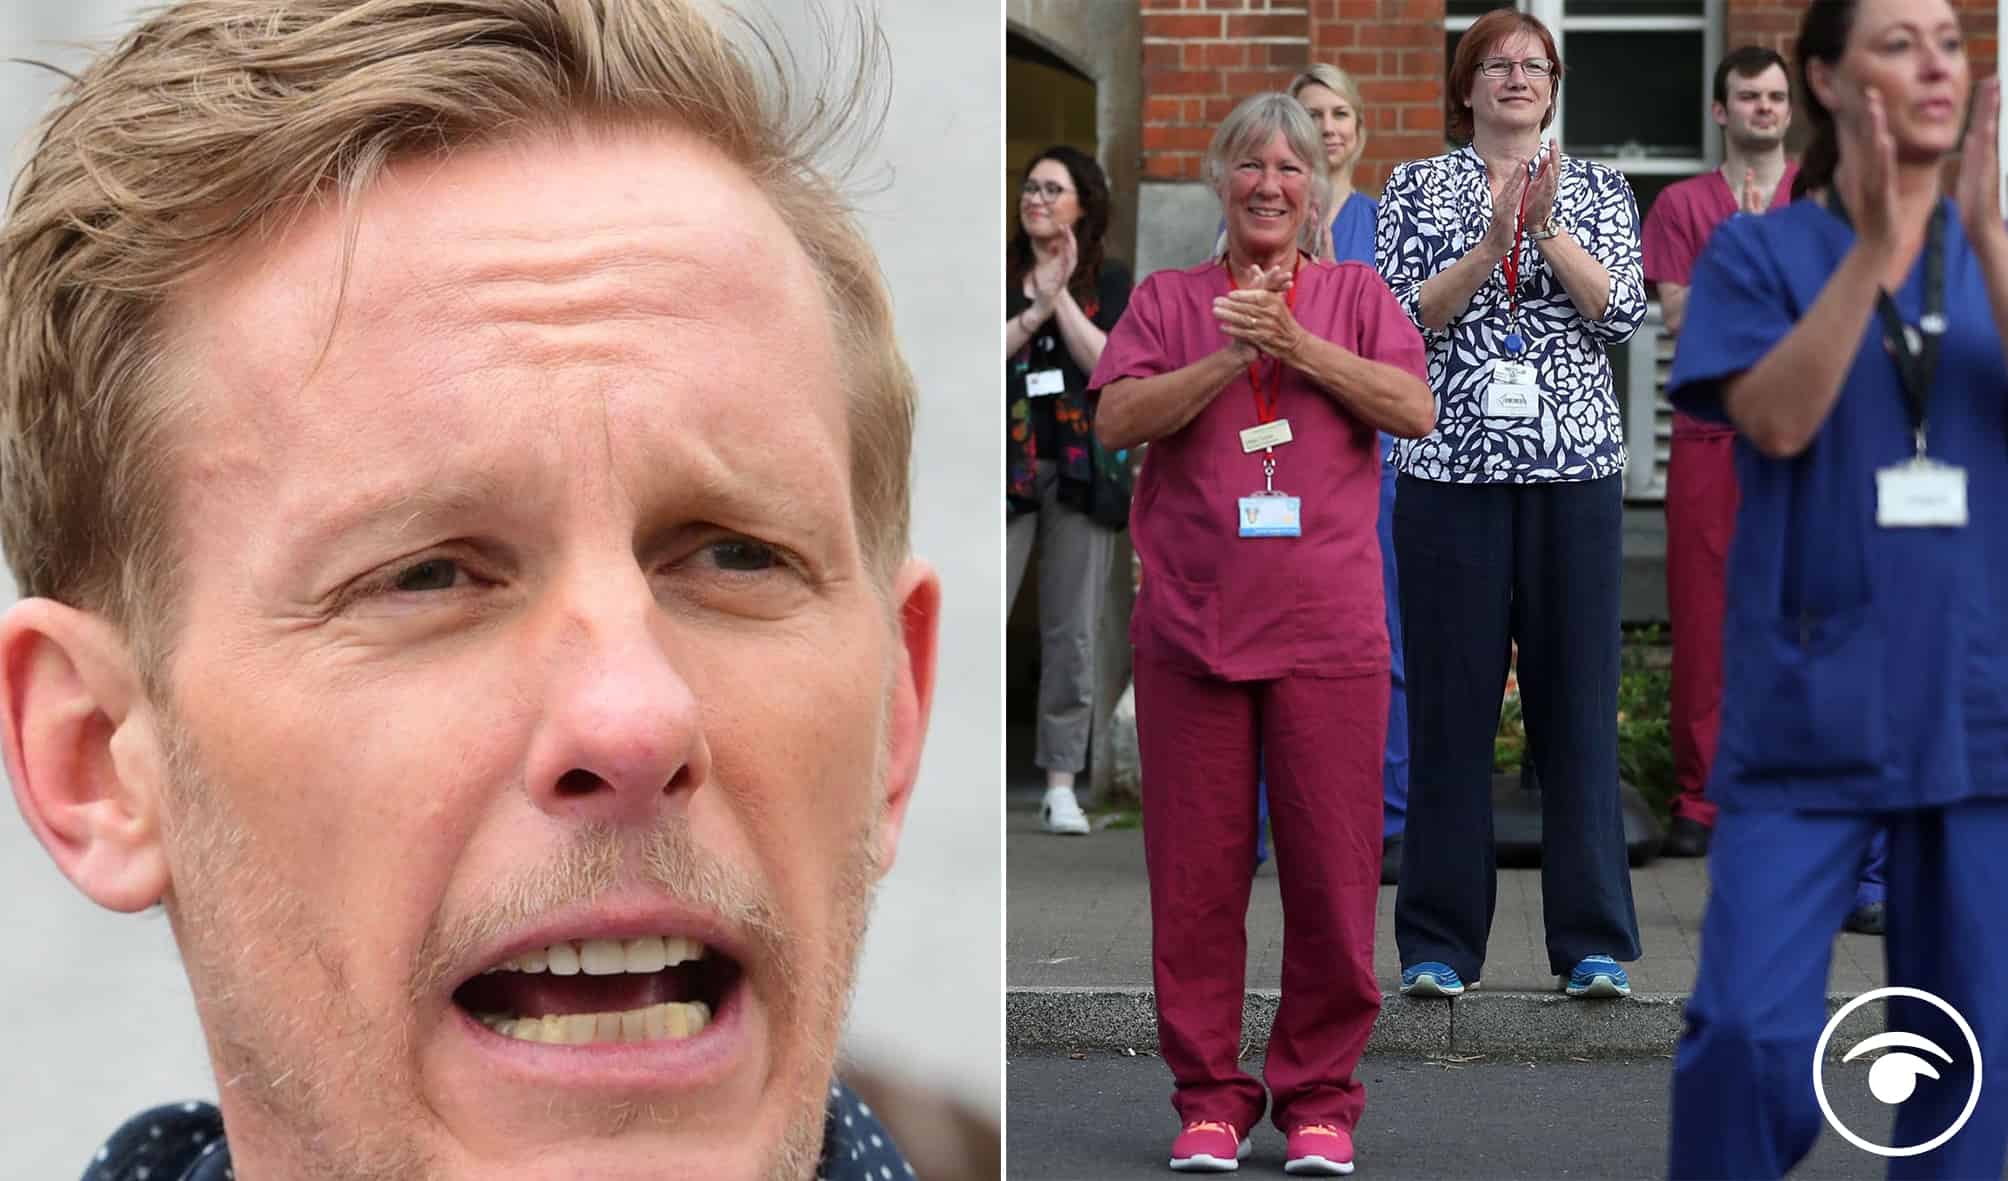 Reactions as ex actor Laurence Fox says NHS is ‘so sensitive it needs a round of applause just to finish work’